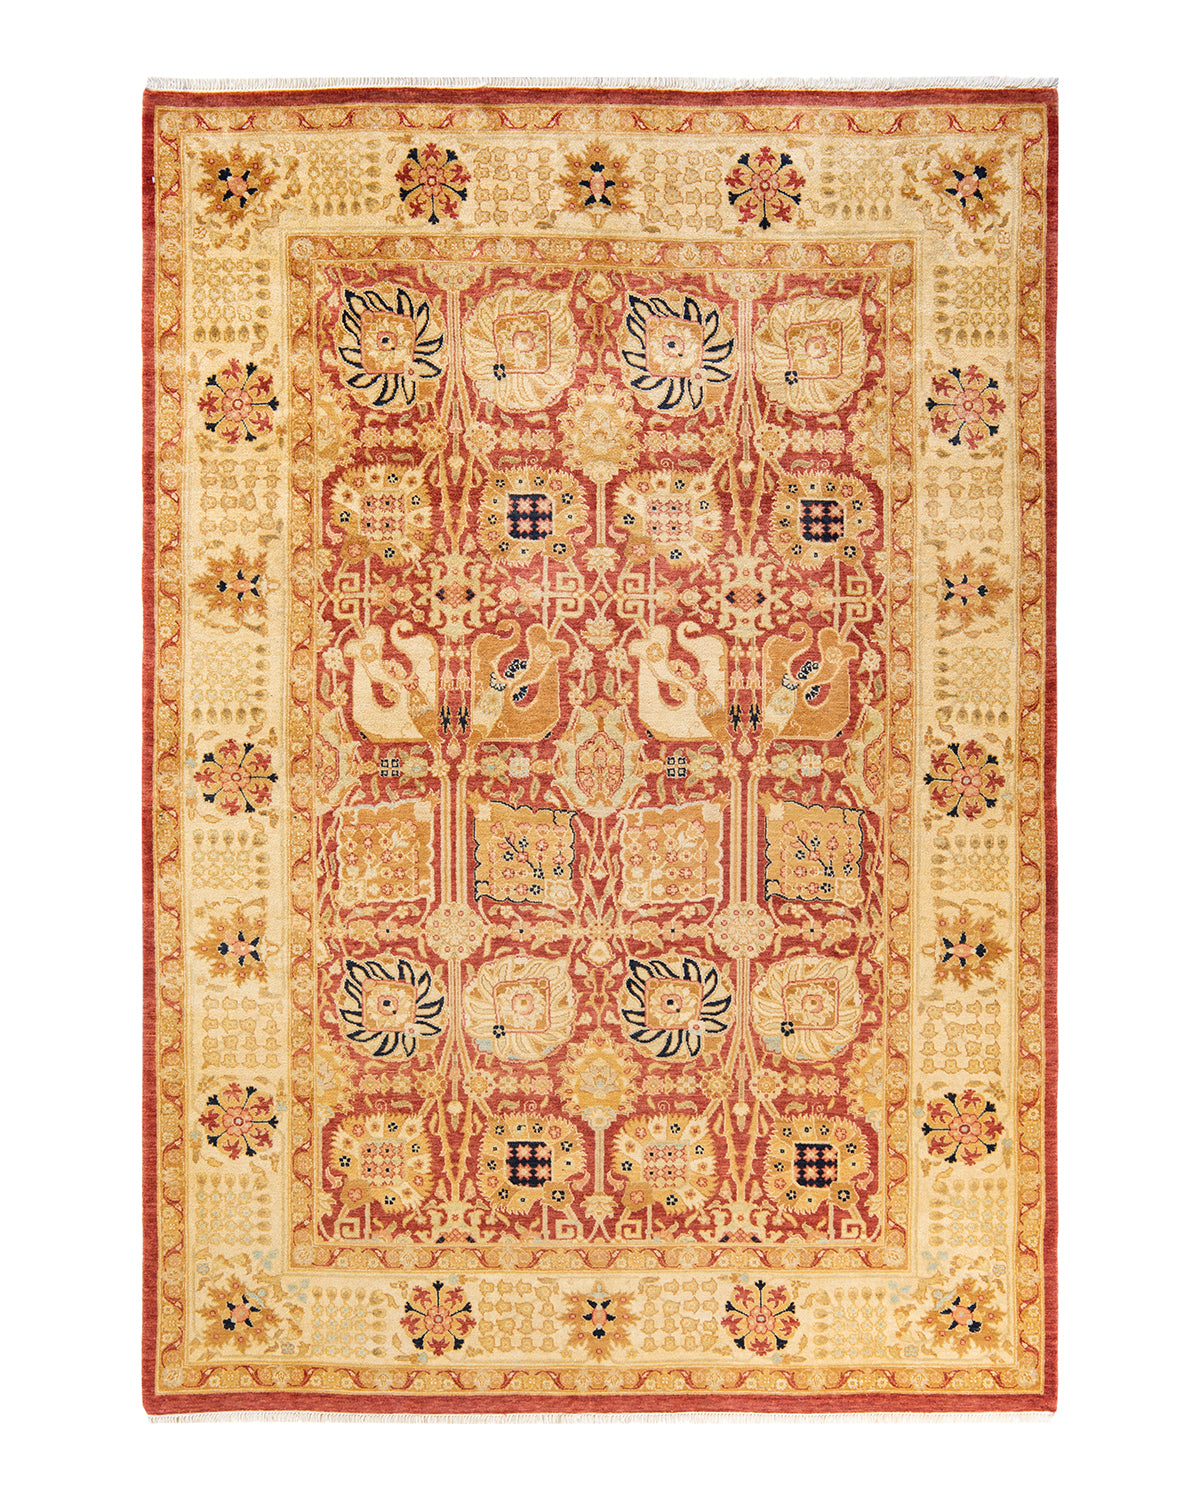 Eclectic, One-of-a-Kind Hand-Knotted Area Rug  - Orange, 6' 2" x 8' 10"